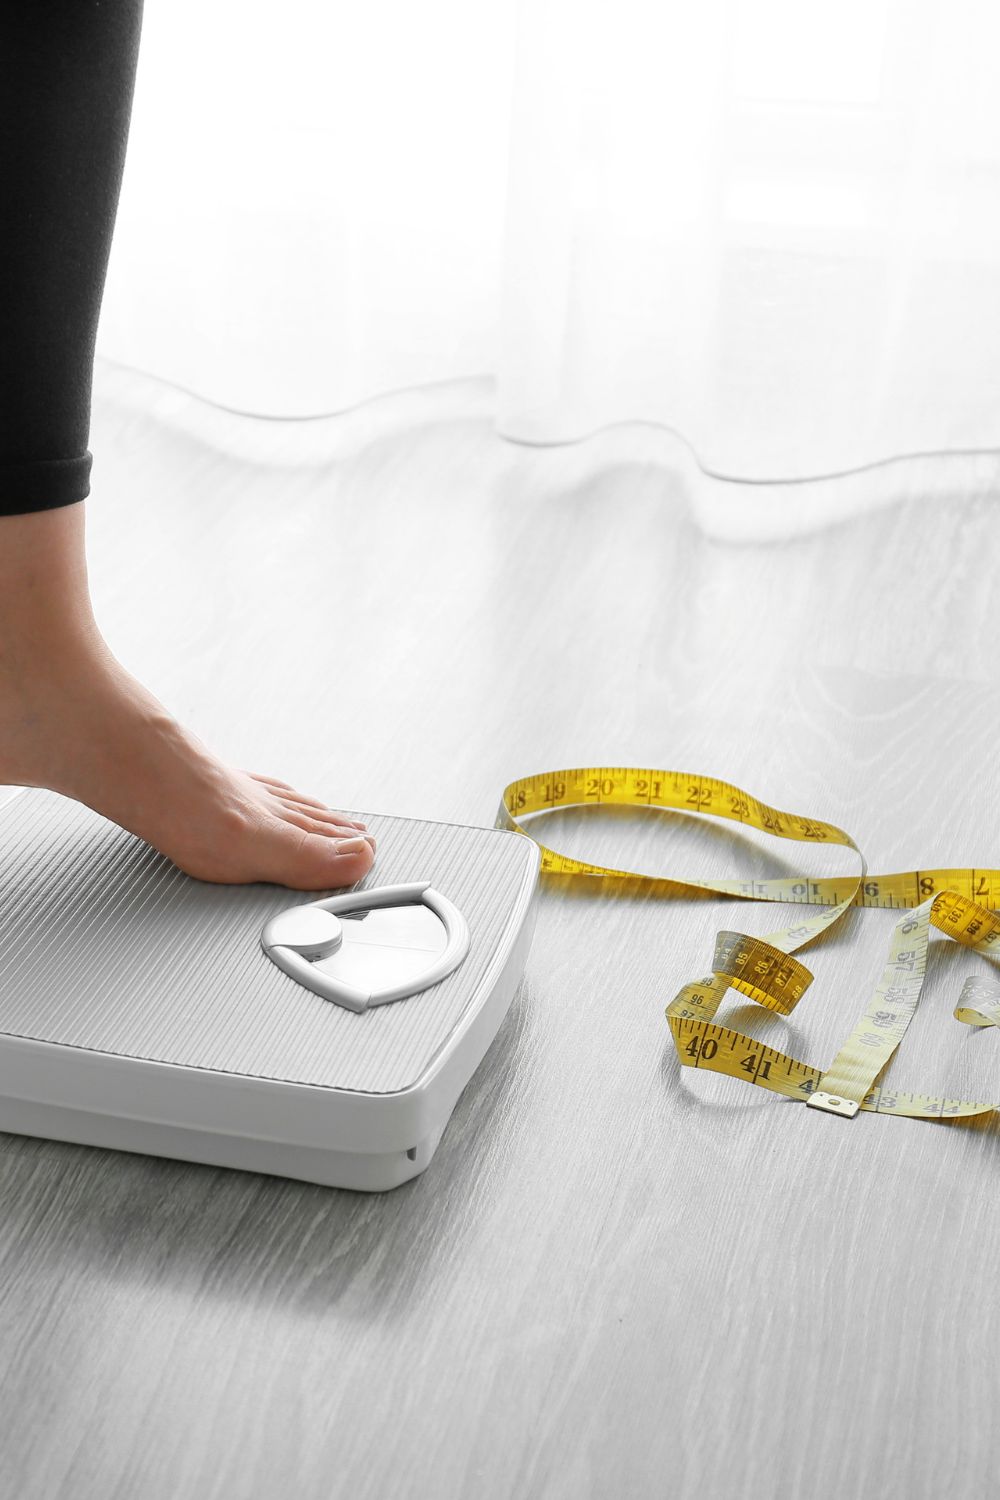 Natural Reasons You're Not Losing Weight